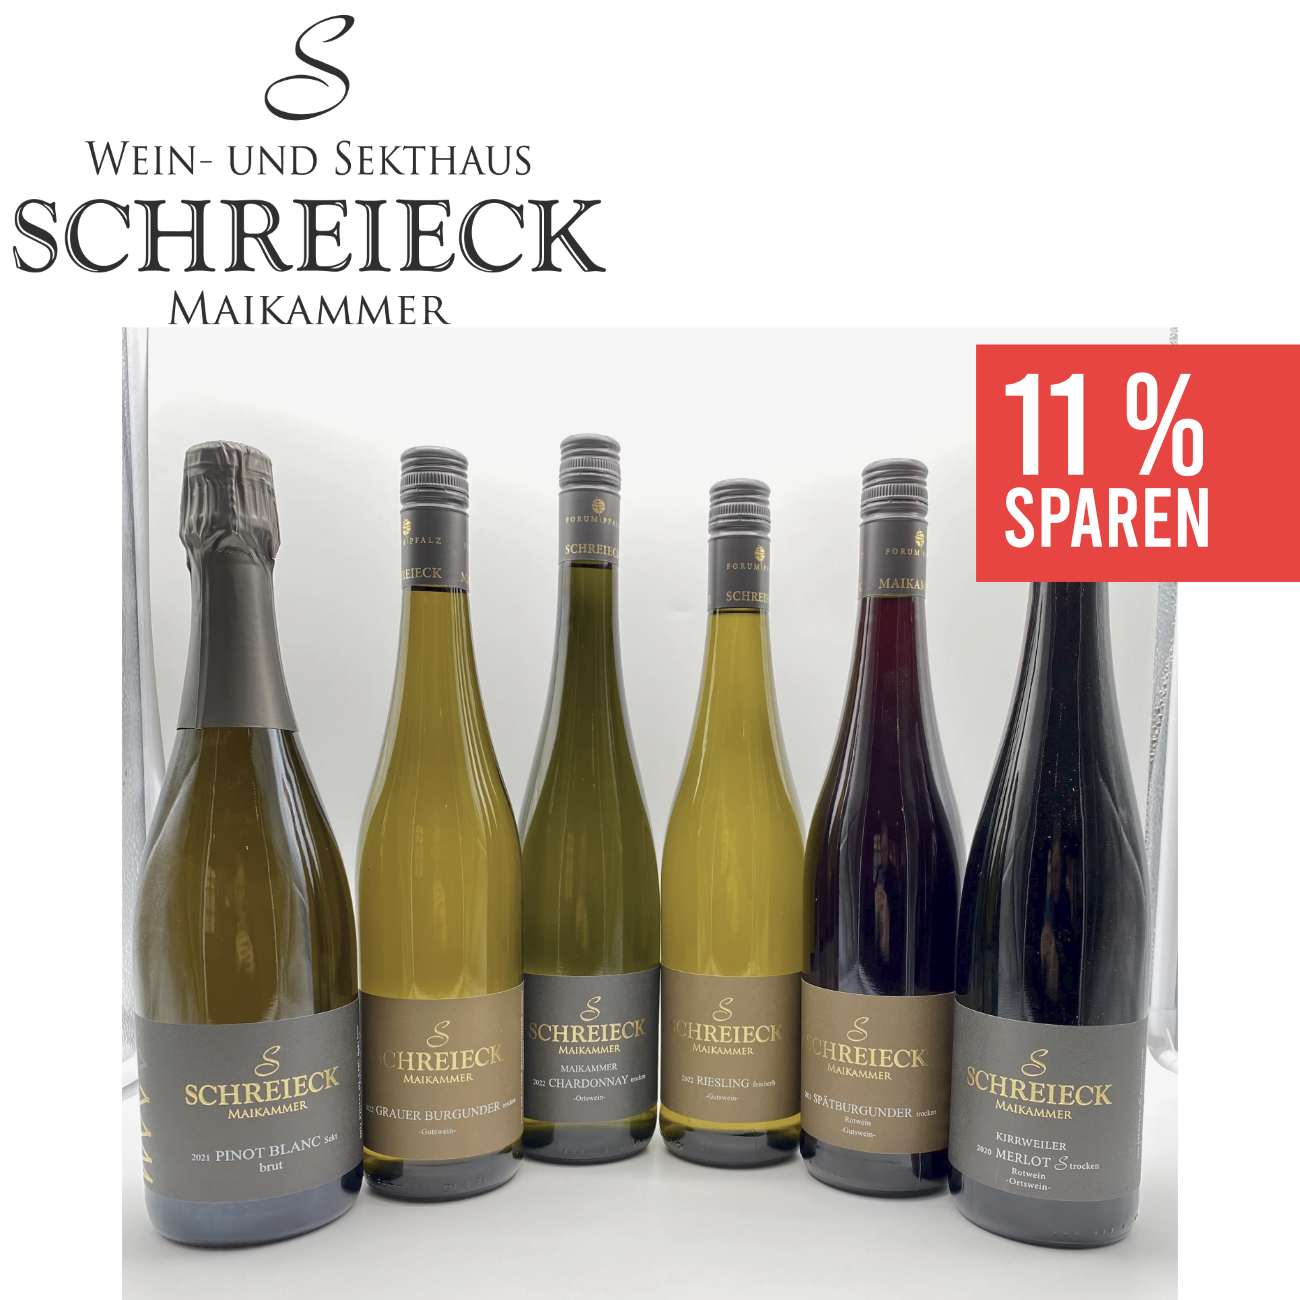 our wines Find+Buy: wein.plus members The | Find+Buy wein.plus of